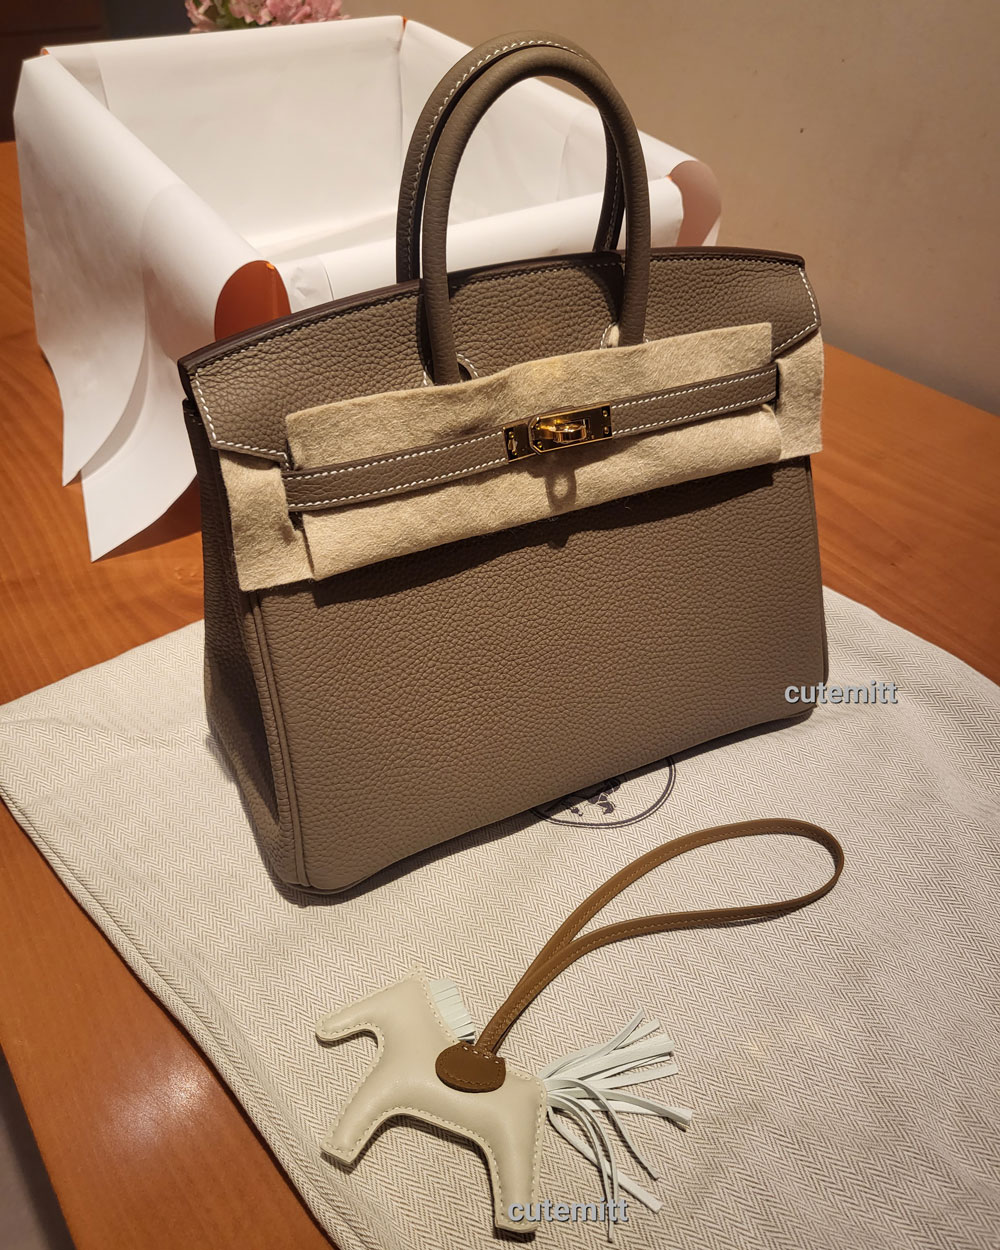 The Insanely Amazing Recent Hermès Purchases Shared on the PurseForum -  PurseBlog